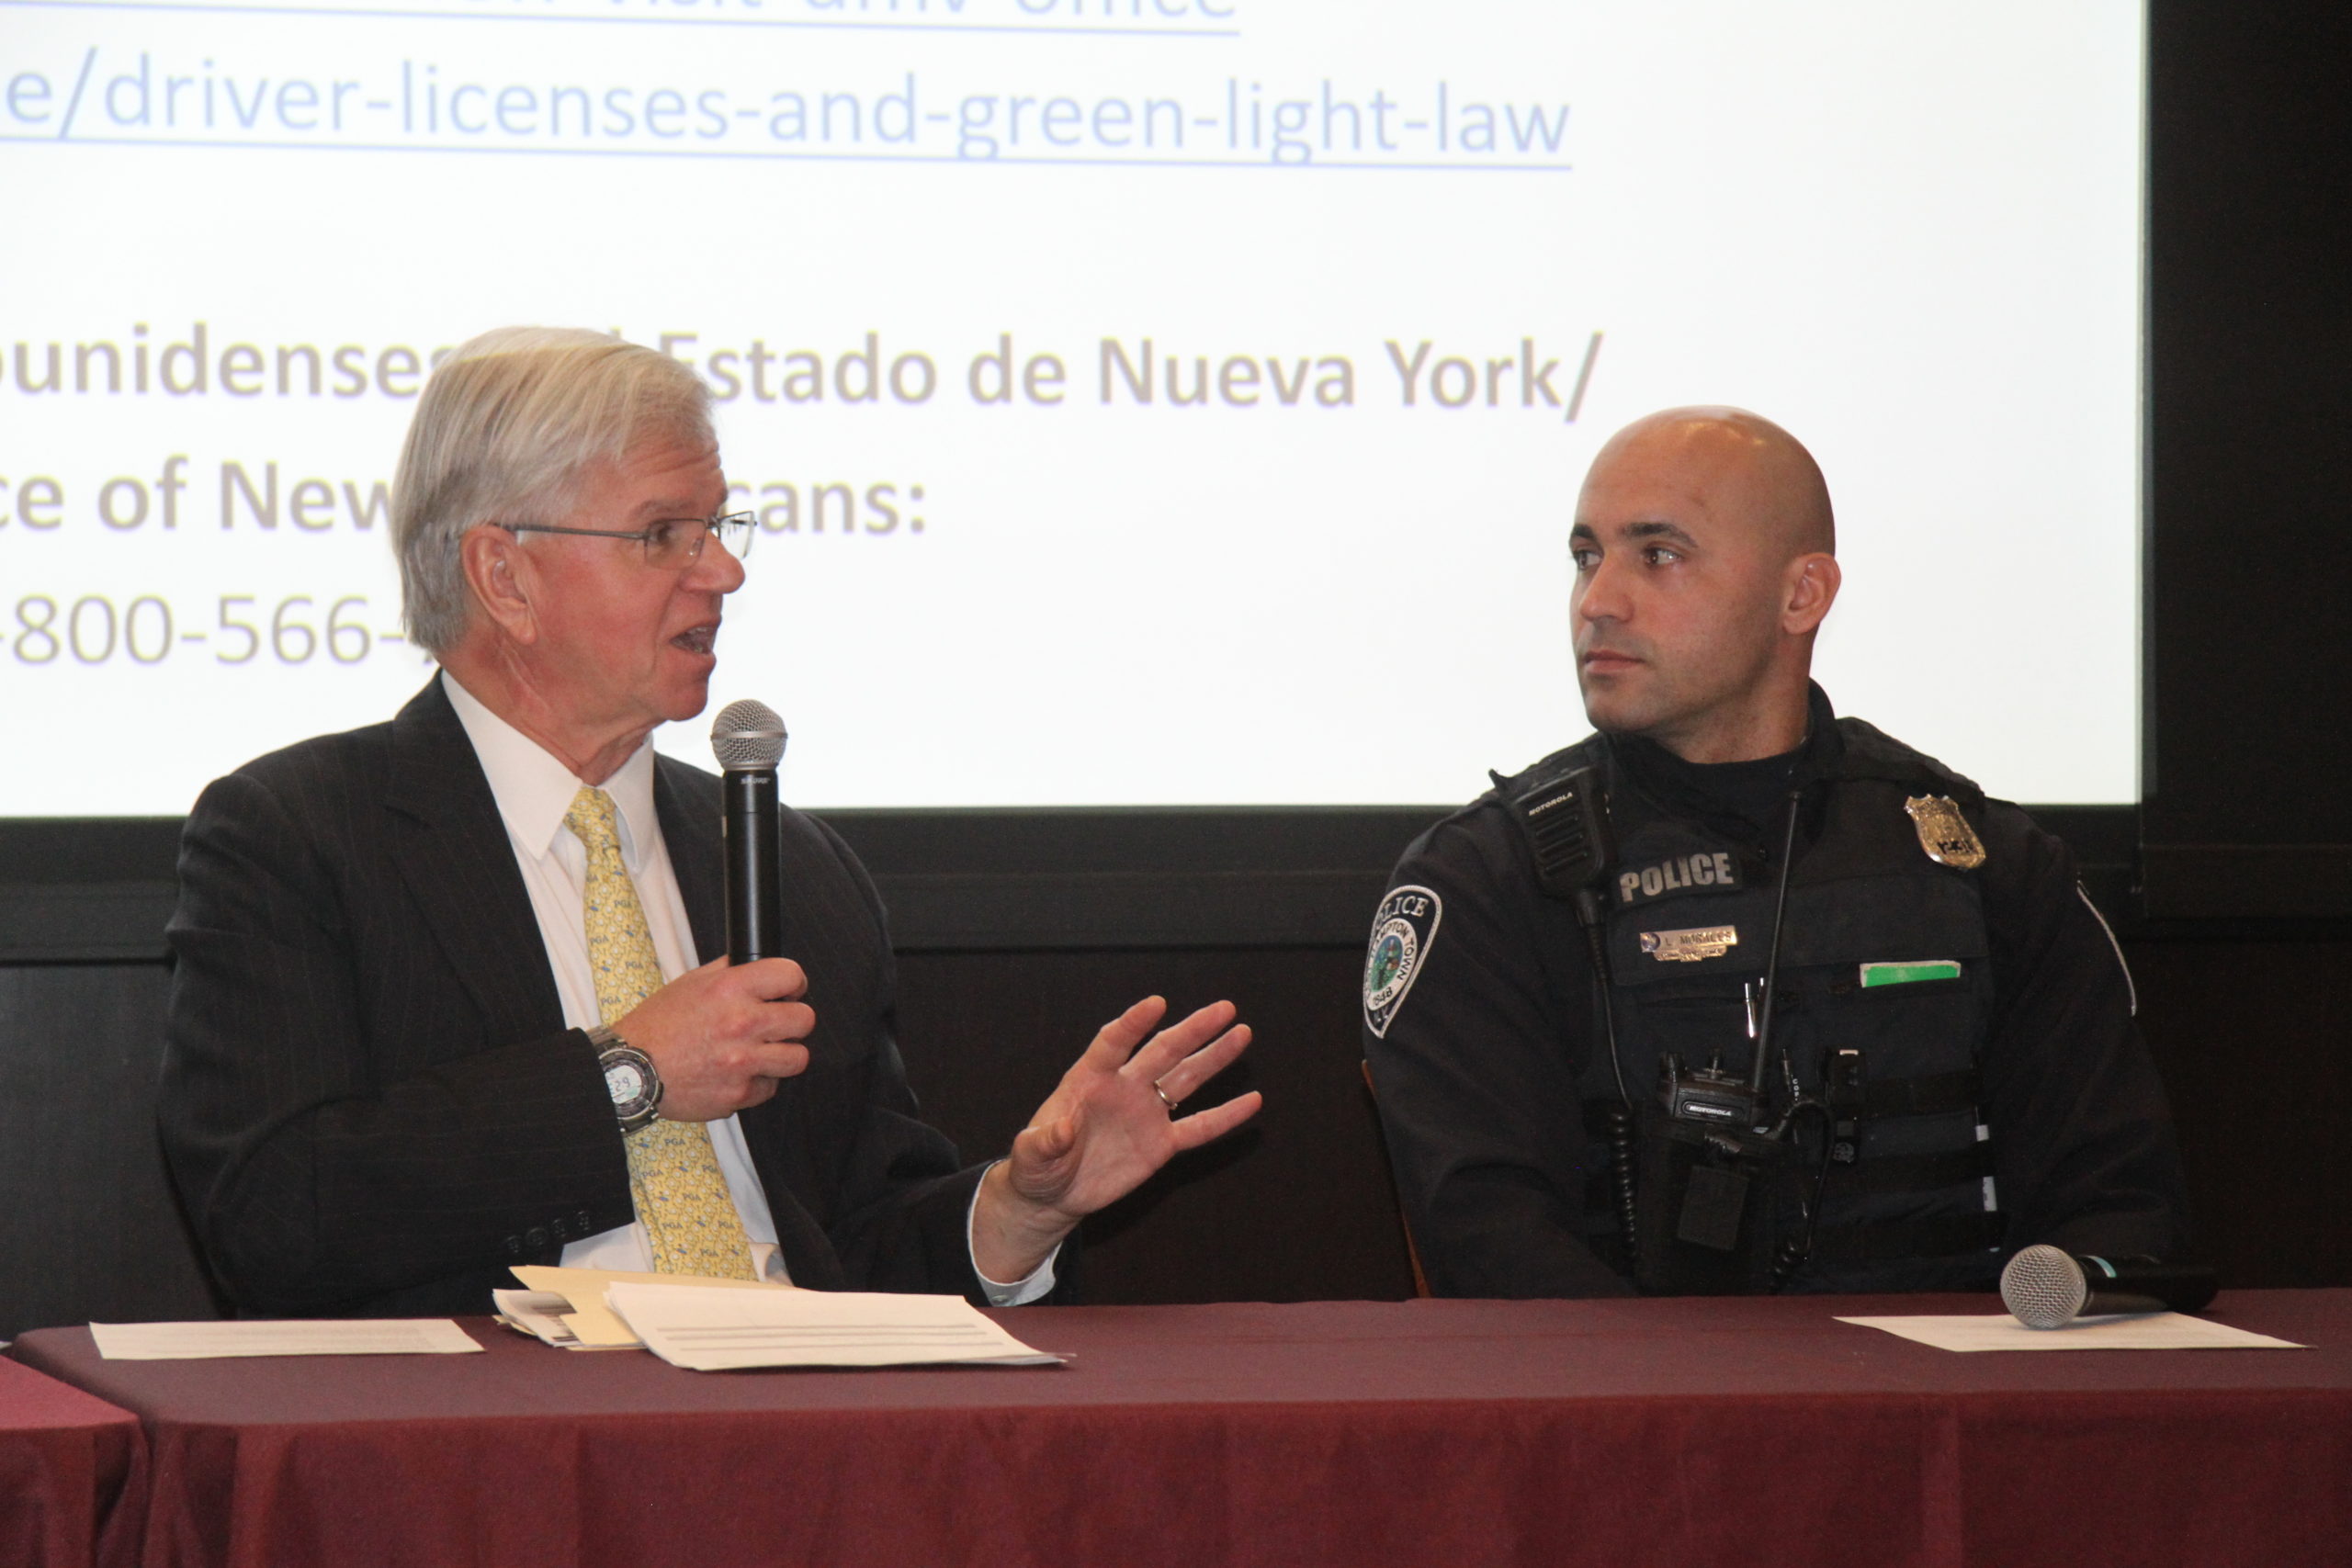 State Assemblyman Fred W. Thiele Jr. and East Hampton Town Police Officer Luis Morales spoke of the benefits the new license law has brought to the Latino community on the East End. 